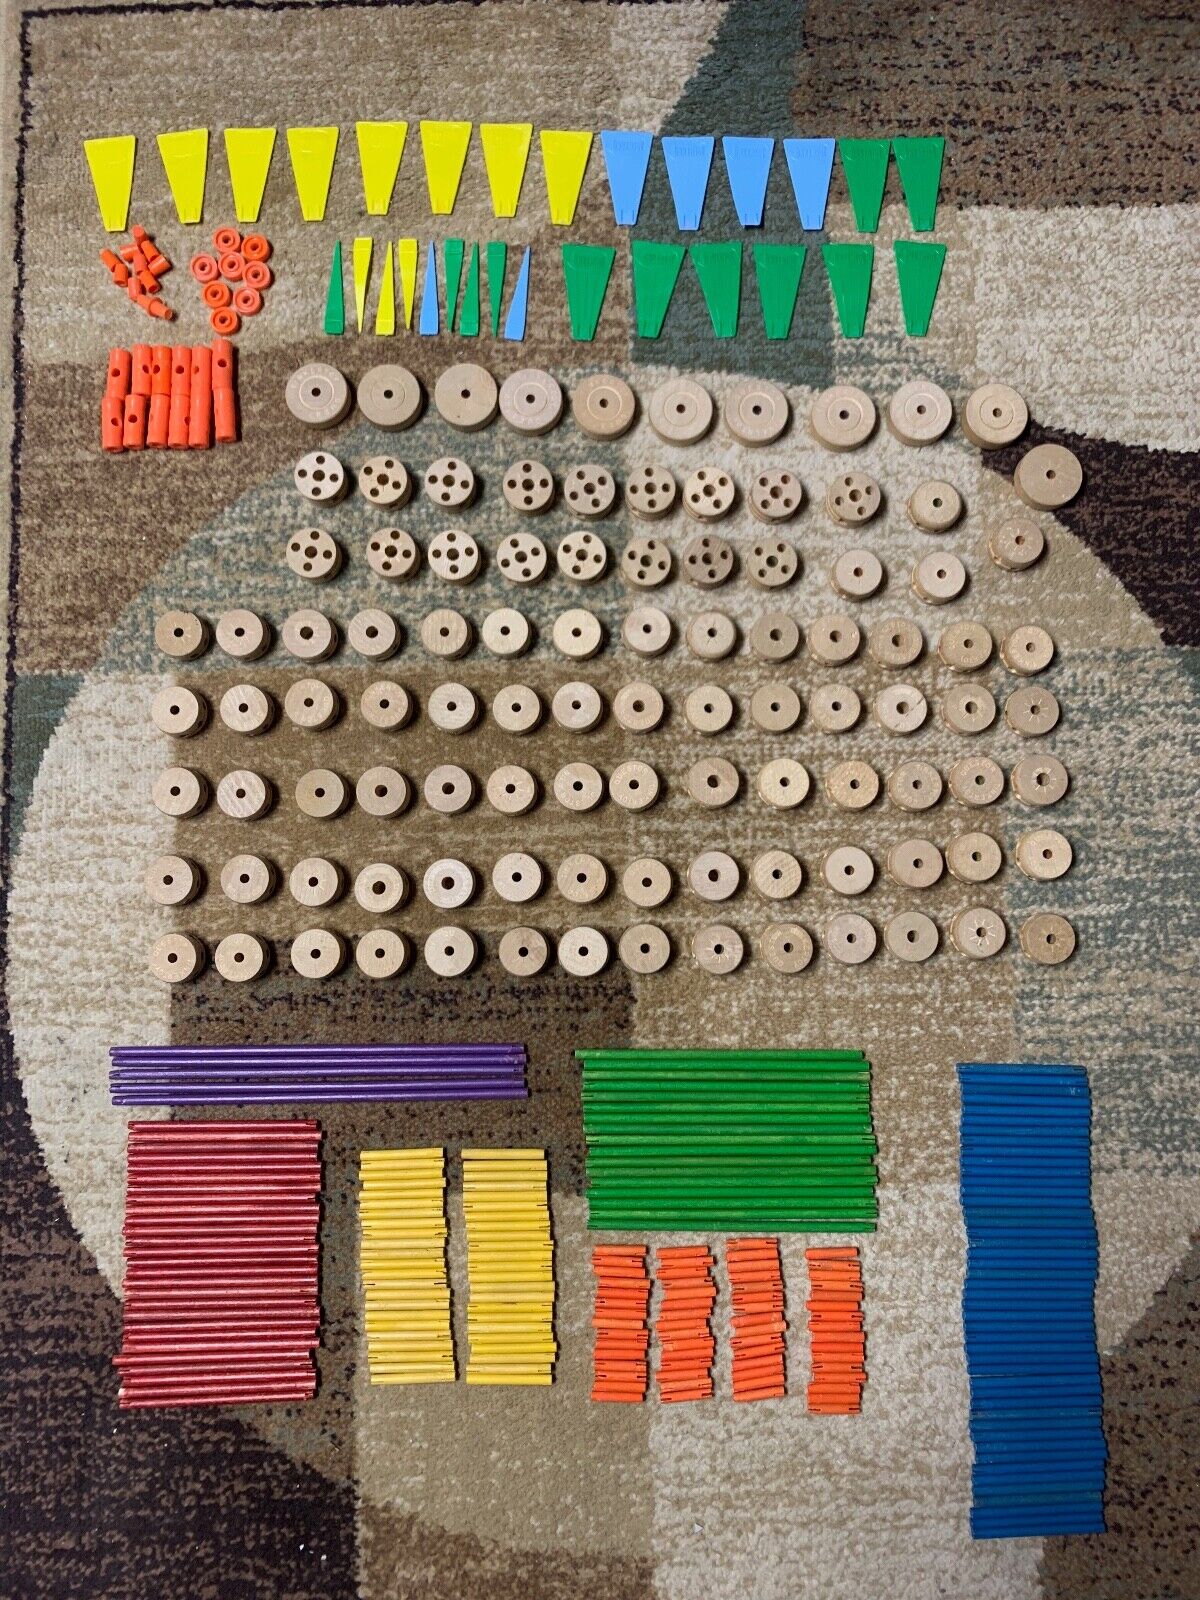 HUGE 200+ PIECE TINKER TOY LOT RODS CONNECTERS SPOOLS LARGE WHEELS FLAGS